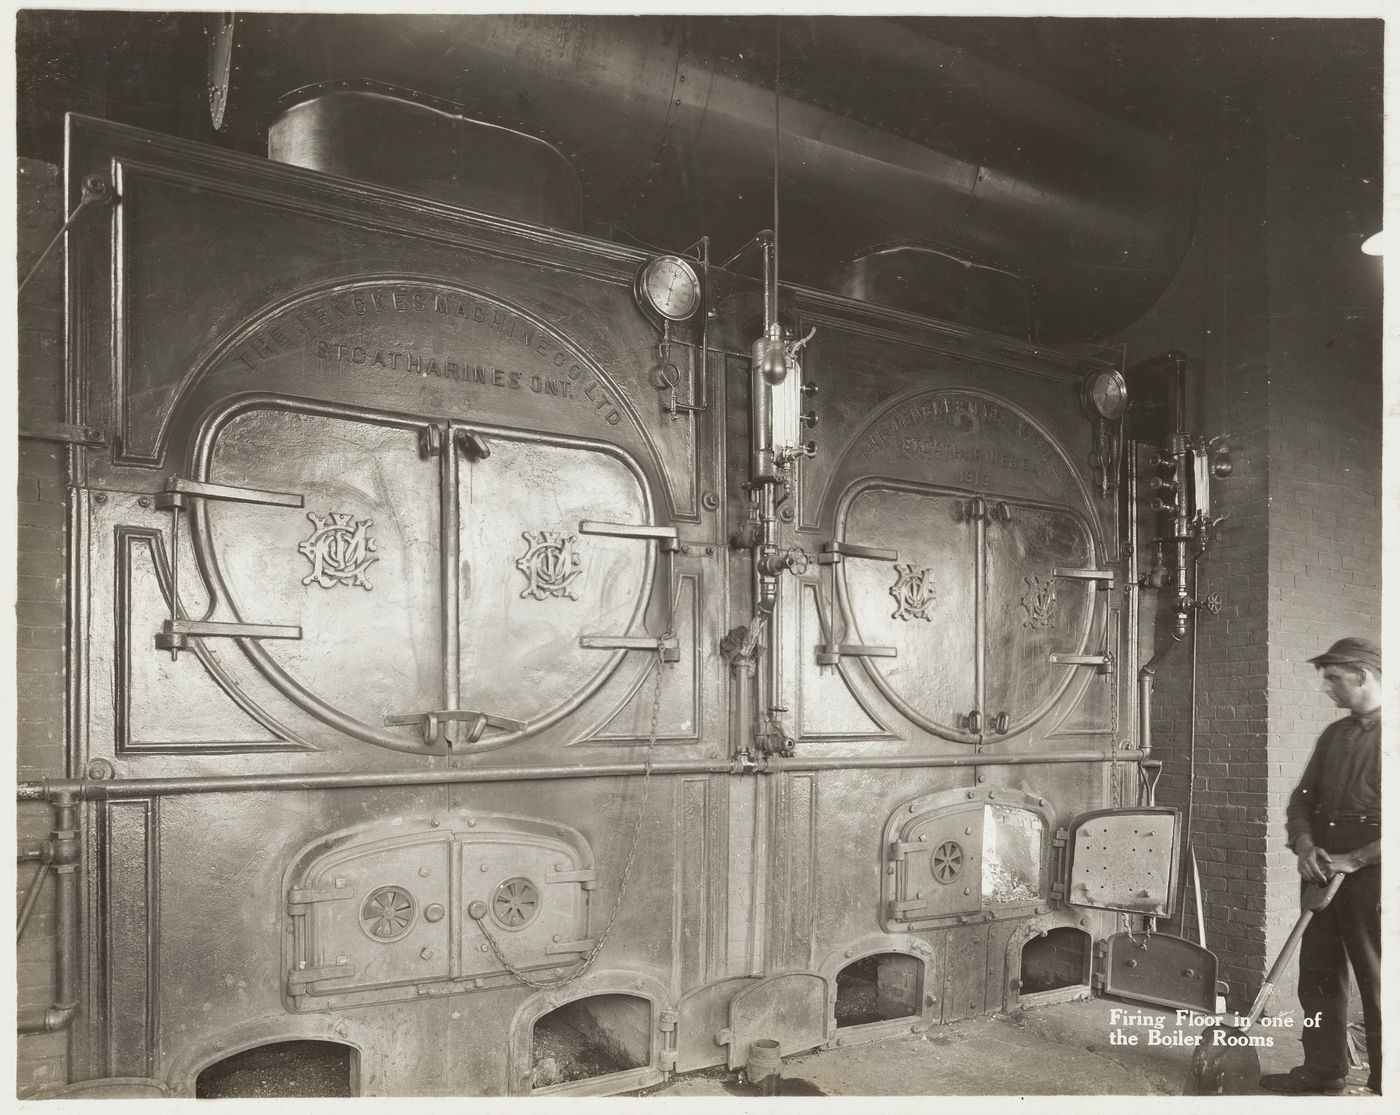 Interior view of firing floor in one of the boiler rooms at the Energite Explosives Plant No. 3, the Shell Loading Plant, Renfrew, Ontario, Canada